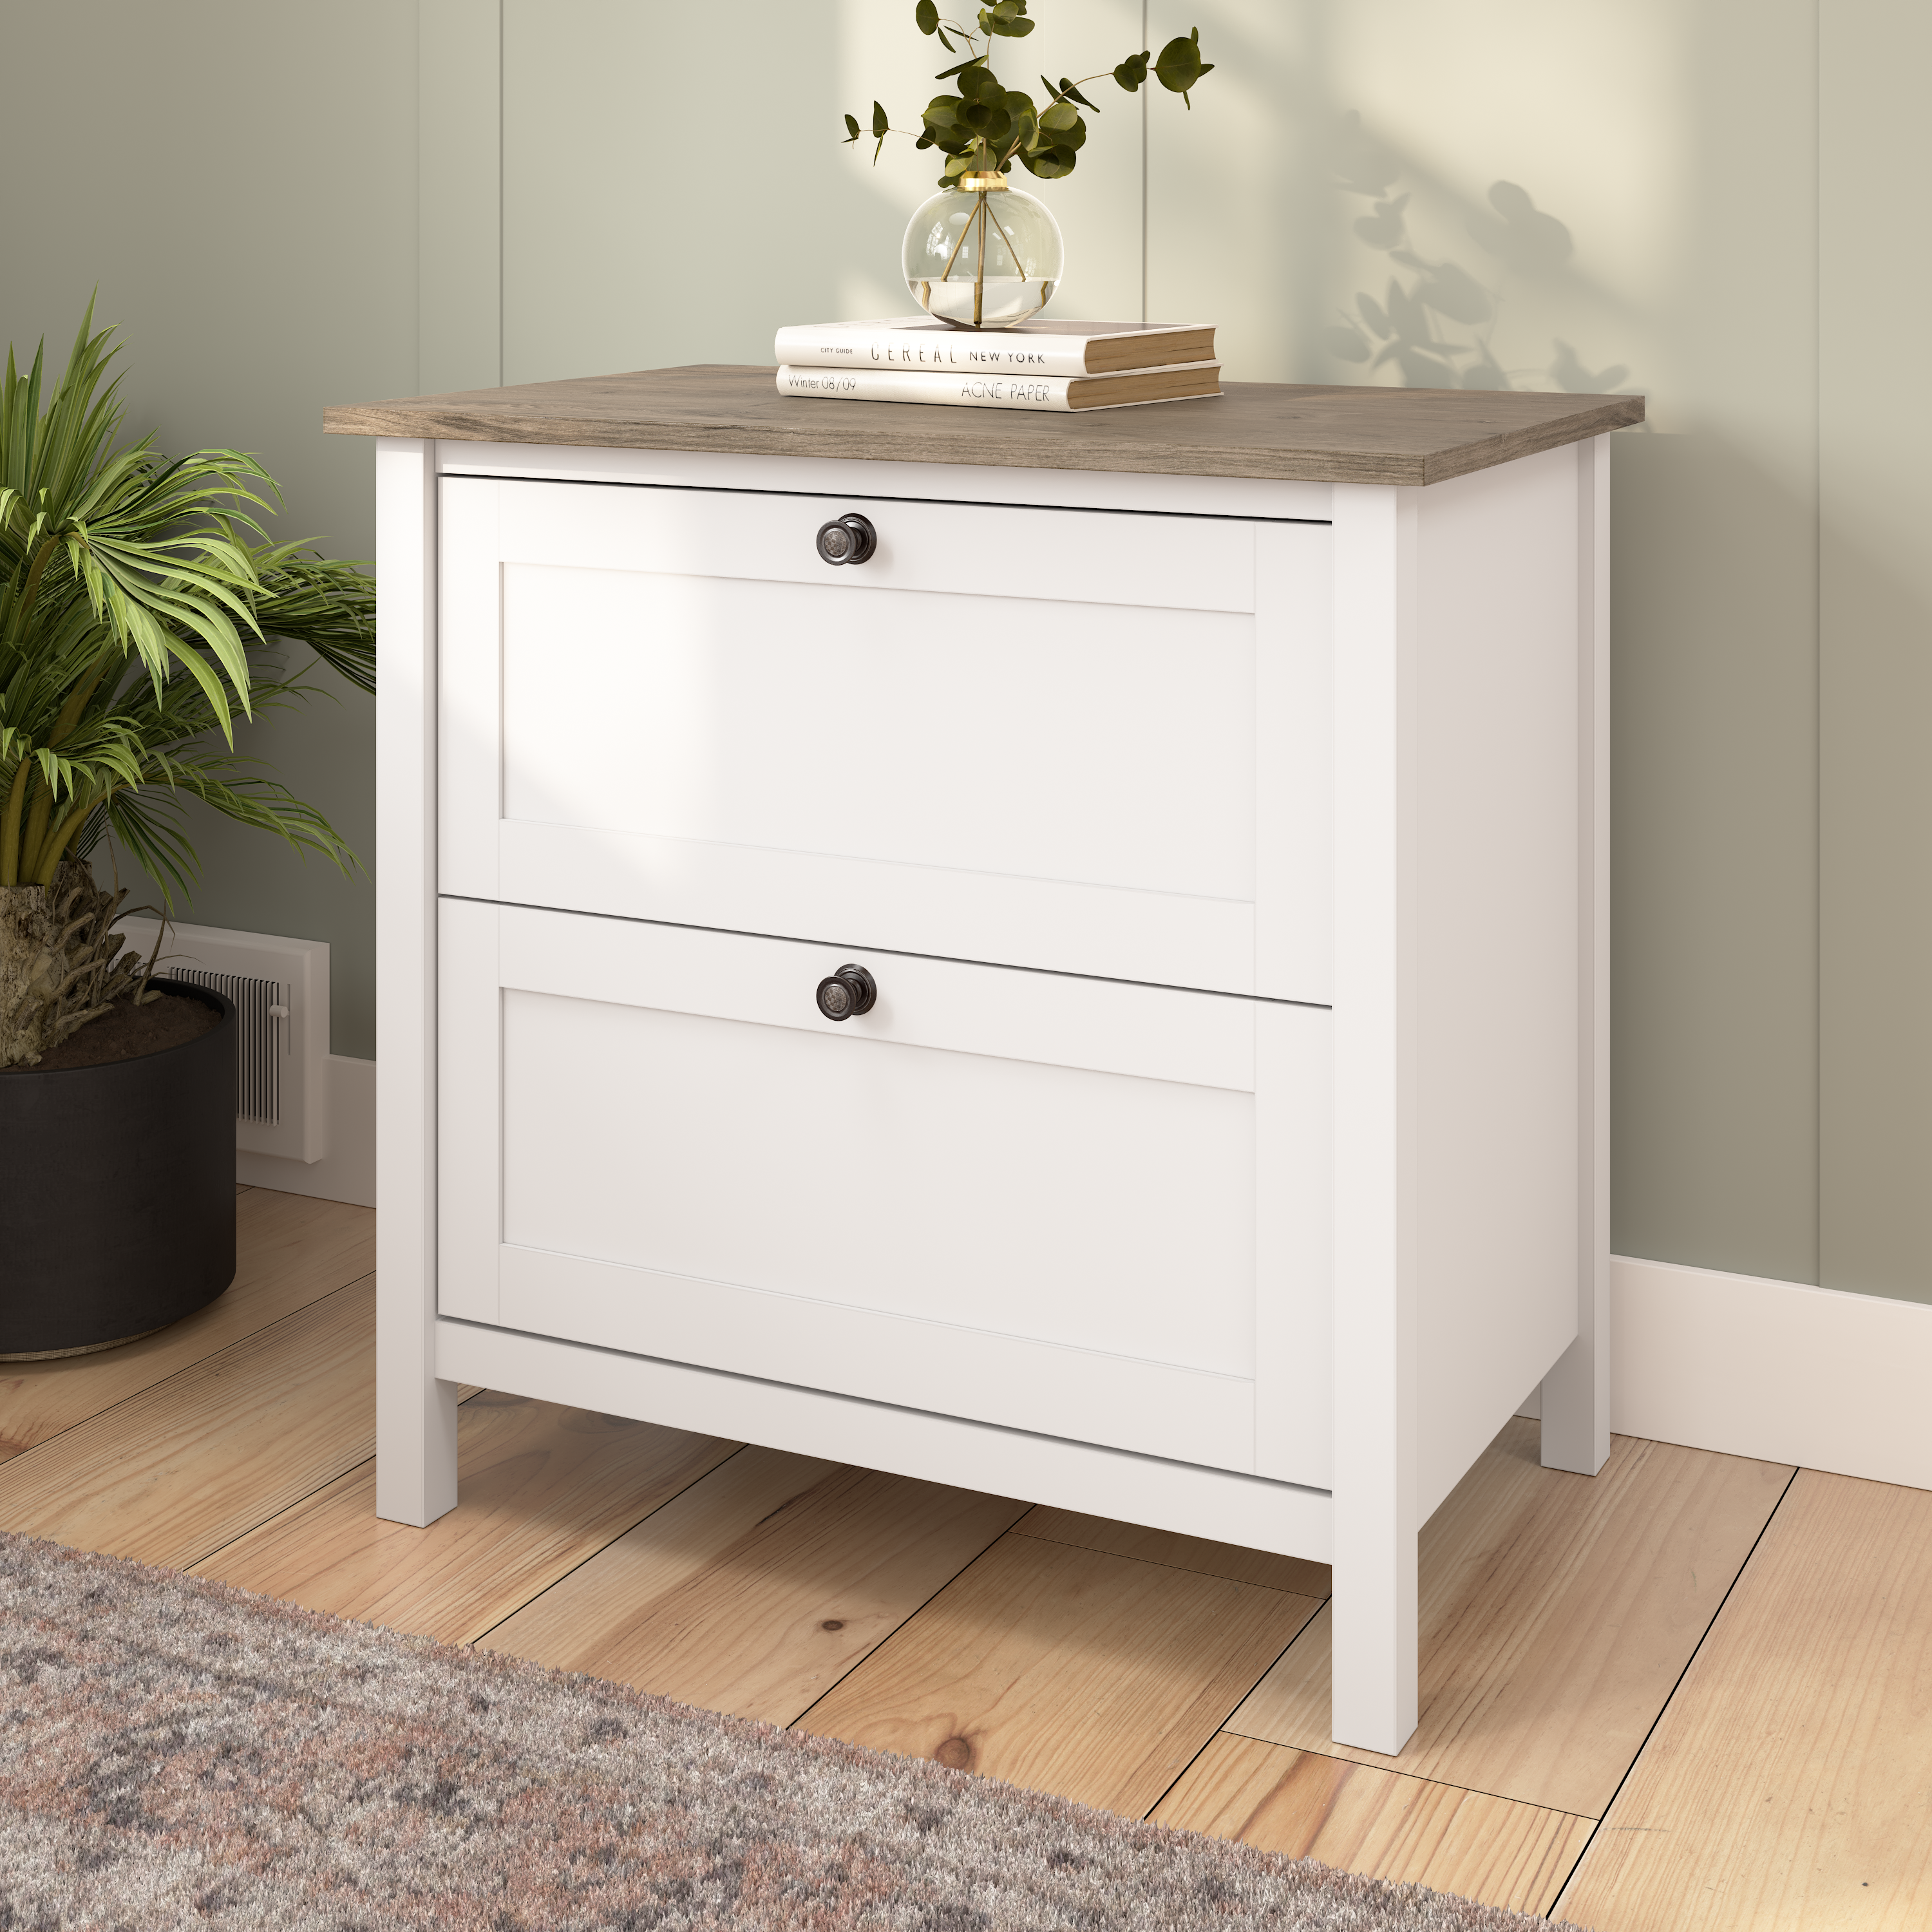 Shop Bush Furniture Mayfield 2 Drawer Lateral File Cabinet 01 MAF131GW2-03 #color_shiplap gray/pure white